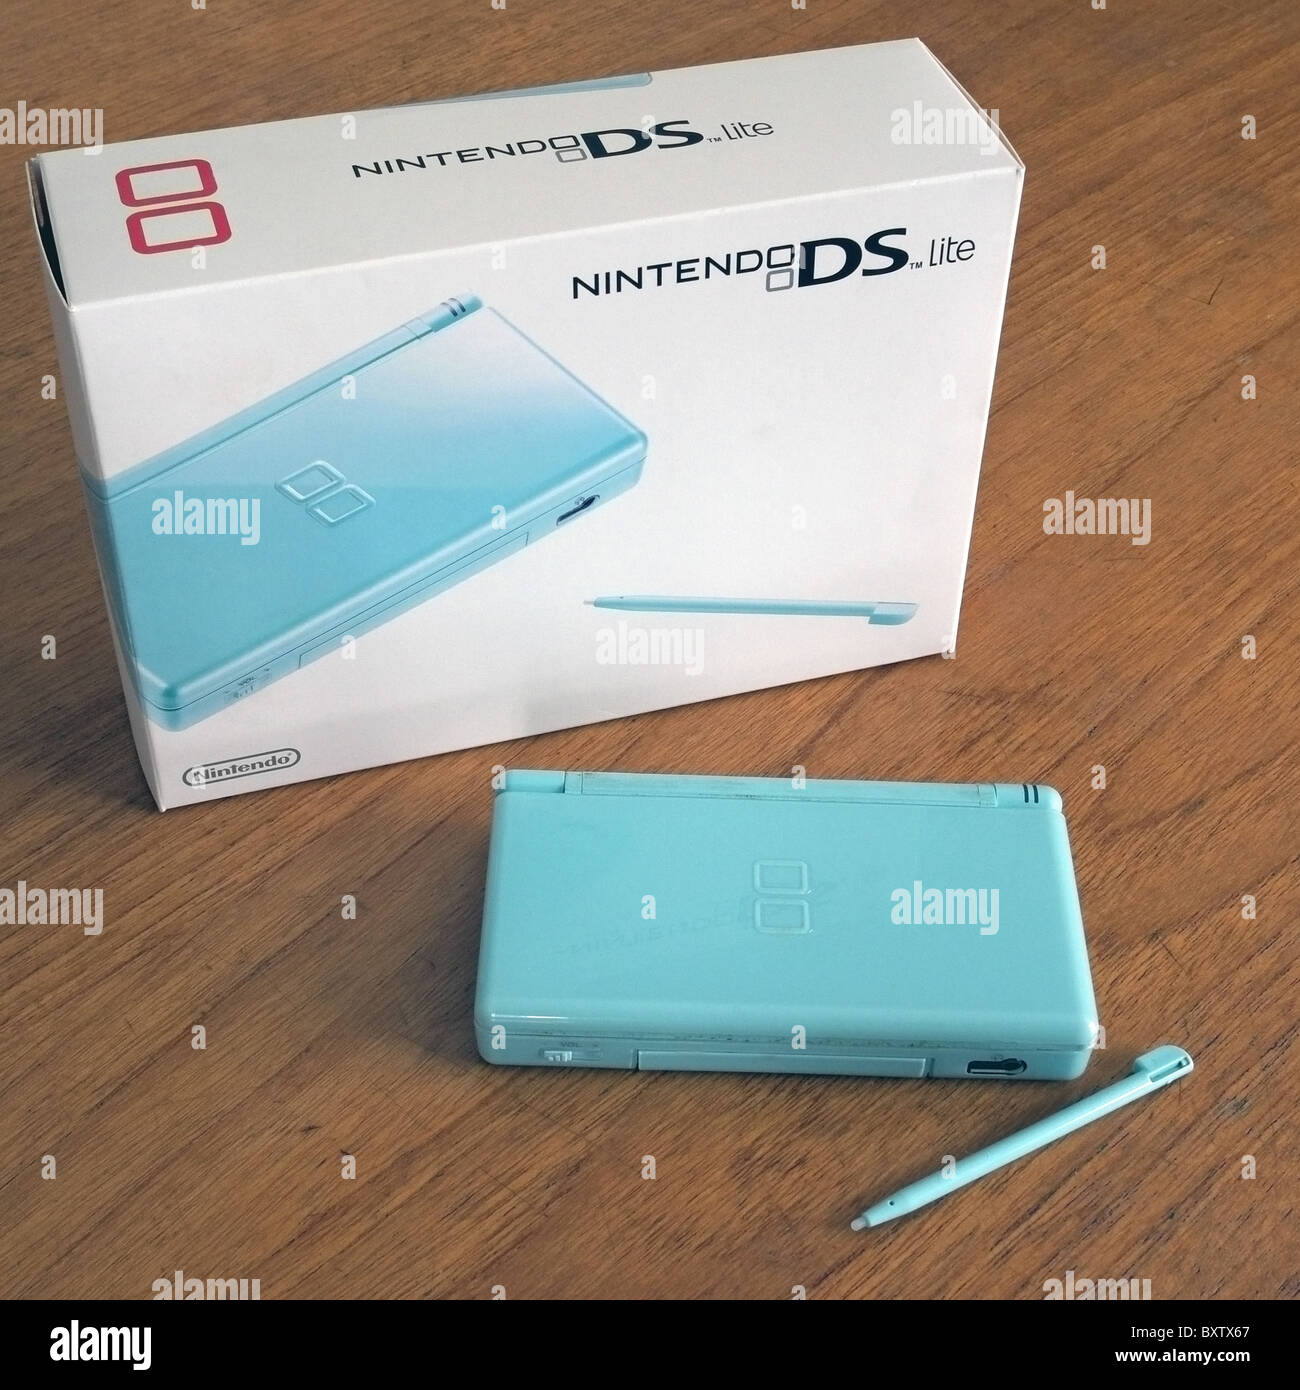 Nintendo DS Lite Handheld Games Console with box packaging, UK Stock Photo